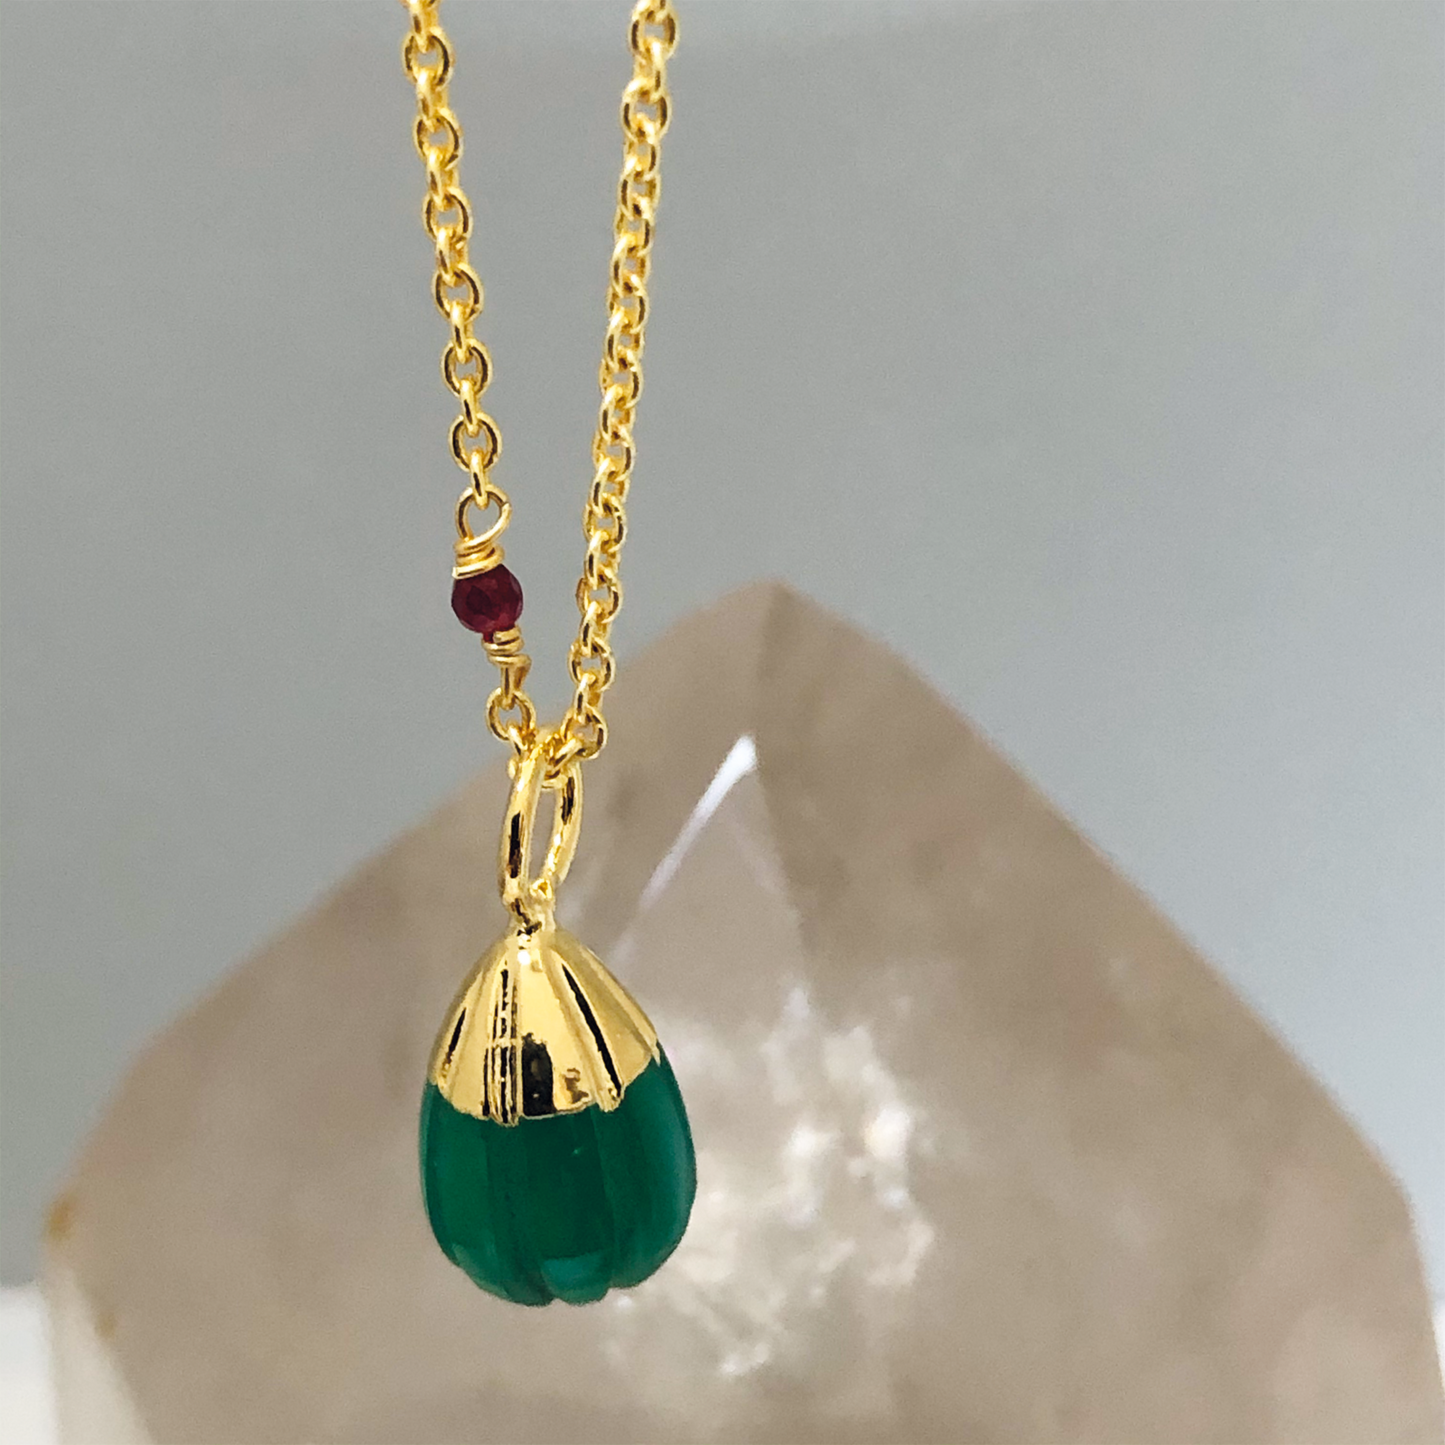 Carved Green Onyx Pendant on Gold Multi Gemstone Rosary Chain